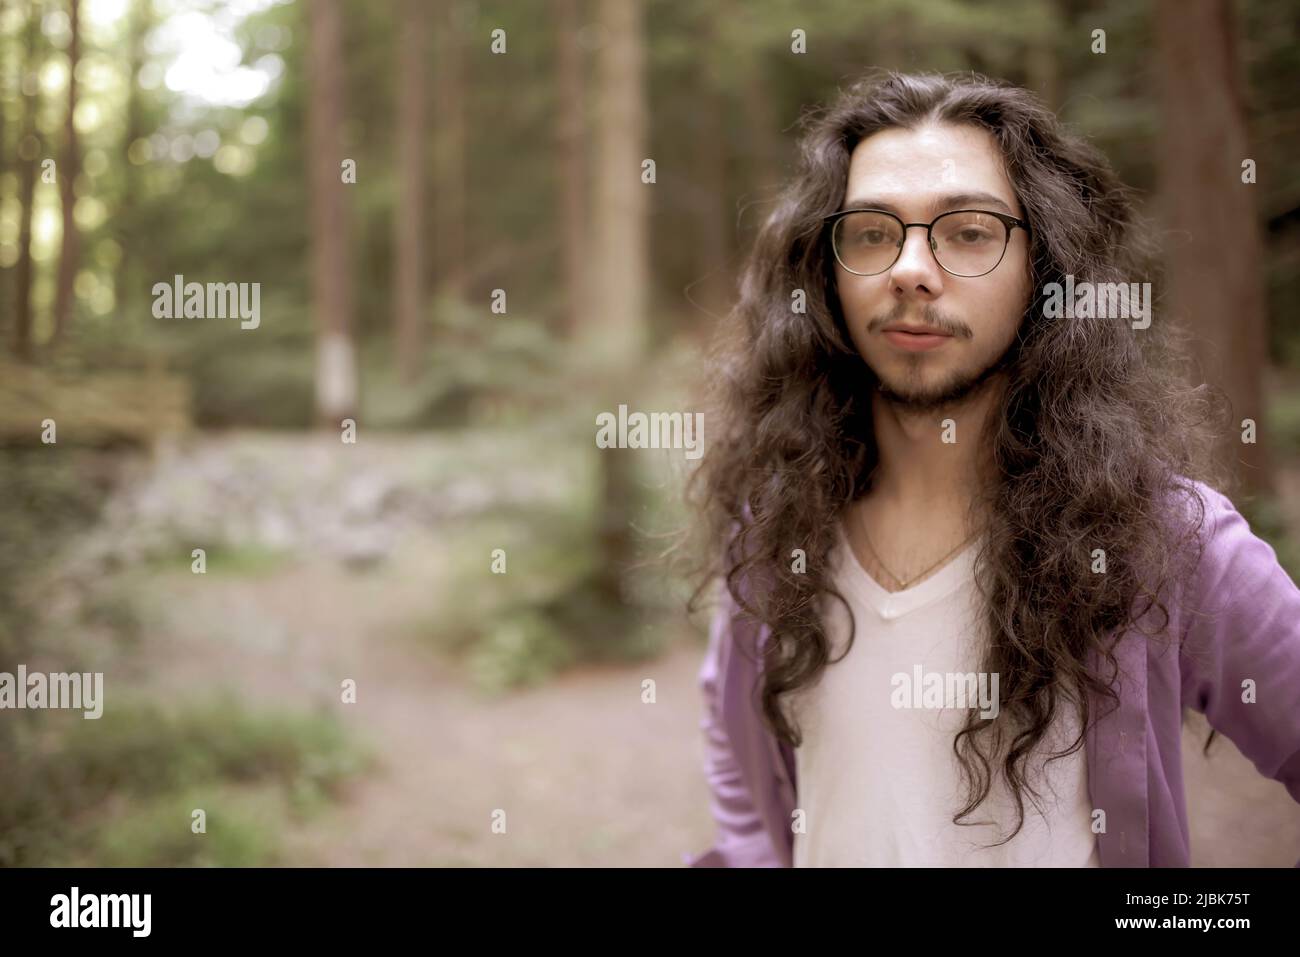 A handsome young man with long hair stands off center in the woods, looking straight at the camera. Defocused background copy space. Stock Photo